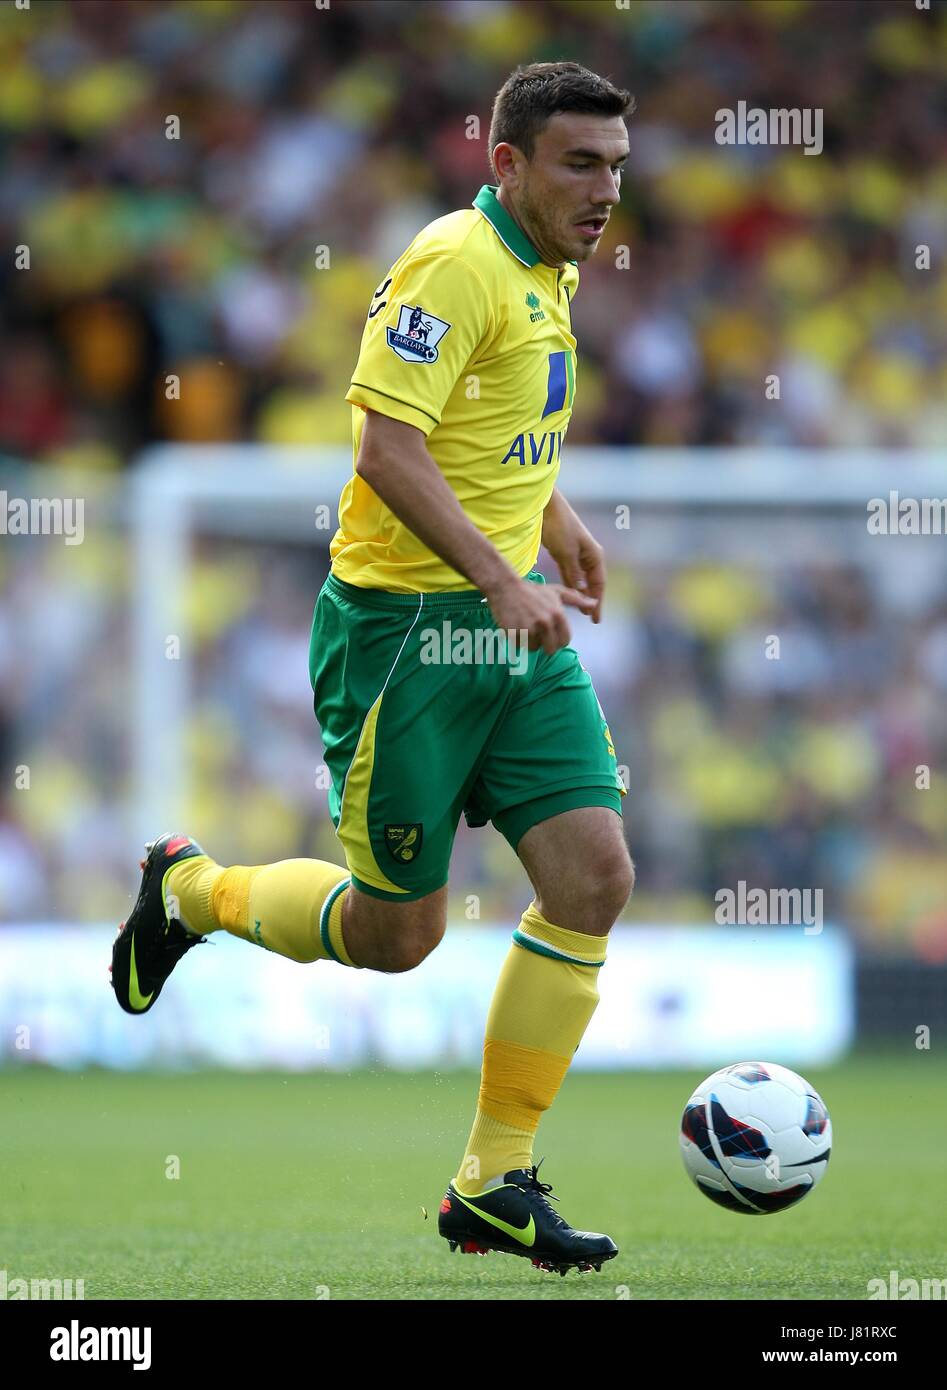 ROBERT SNODGRASS NORWICH CITY FC NORWICH CITY V QPR BARCLAYS PREMIER LEAGUE CARROW ROAD, NORWICH, ENGLAND 25 August 2012 GAO57023     WARNING! This Photograph May Only Be Used For Newspaper And/Or Magazine Editorial Purposes. May Not Be Used For Publications Involving 1 player, 1 Club Or 1 Competition  Without Written Authorisation From Football DataCo Ltd. For Any Queries, Please Contact Football DataCo Ltd on +44 (0) 207 864 9121 Stock Photo